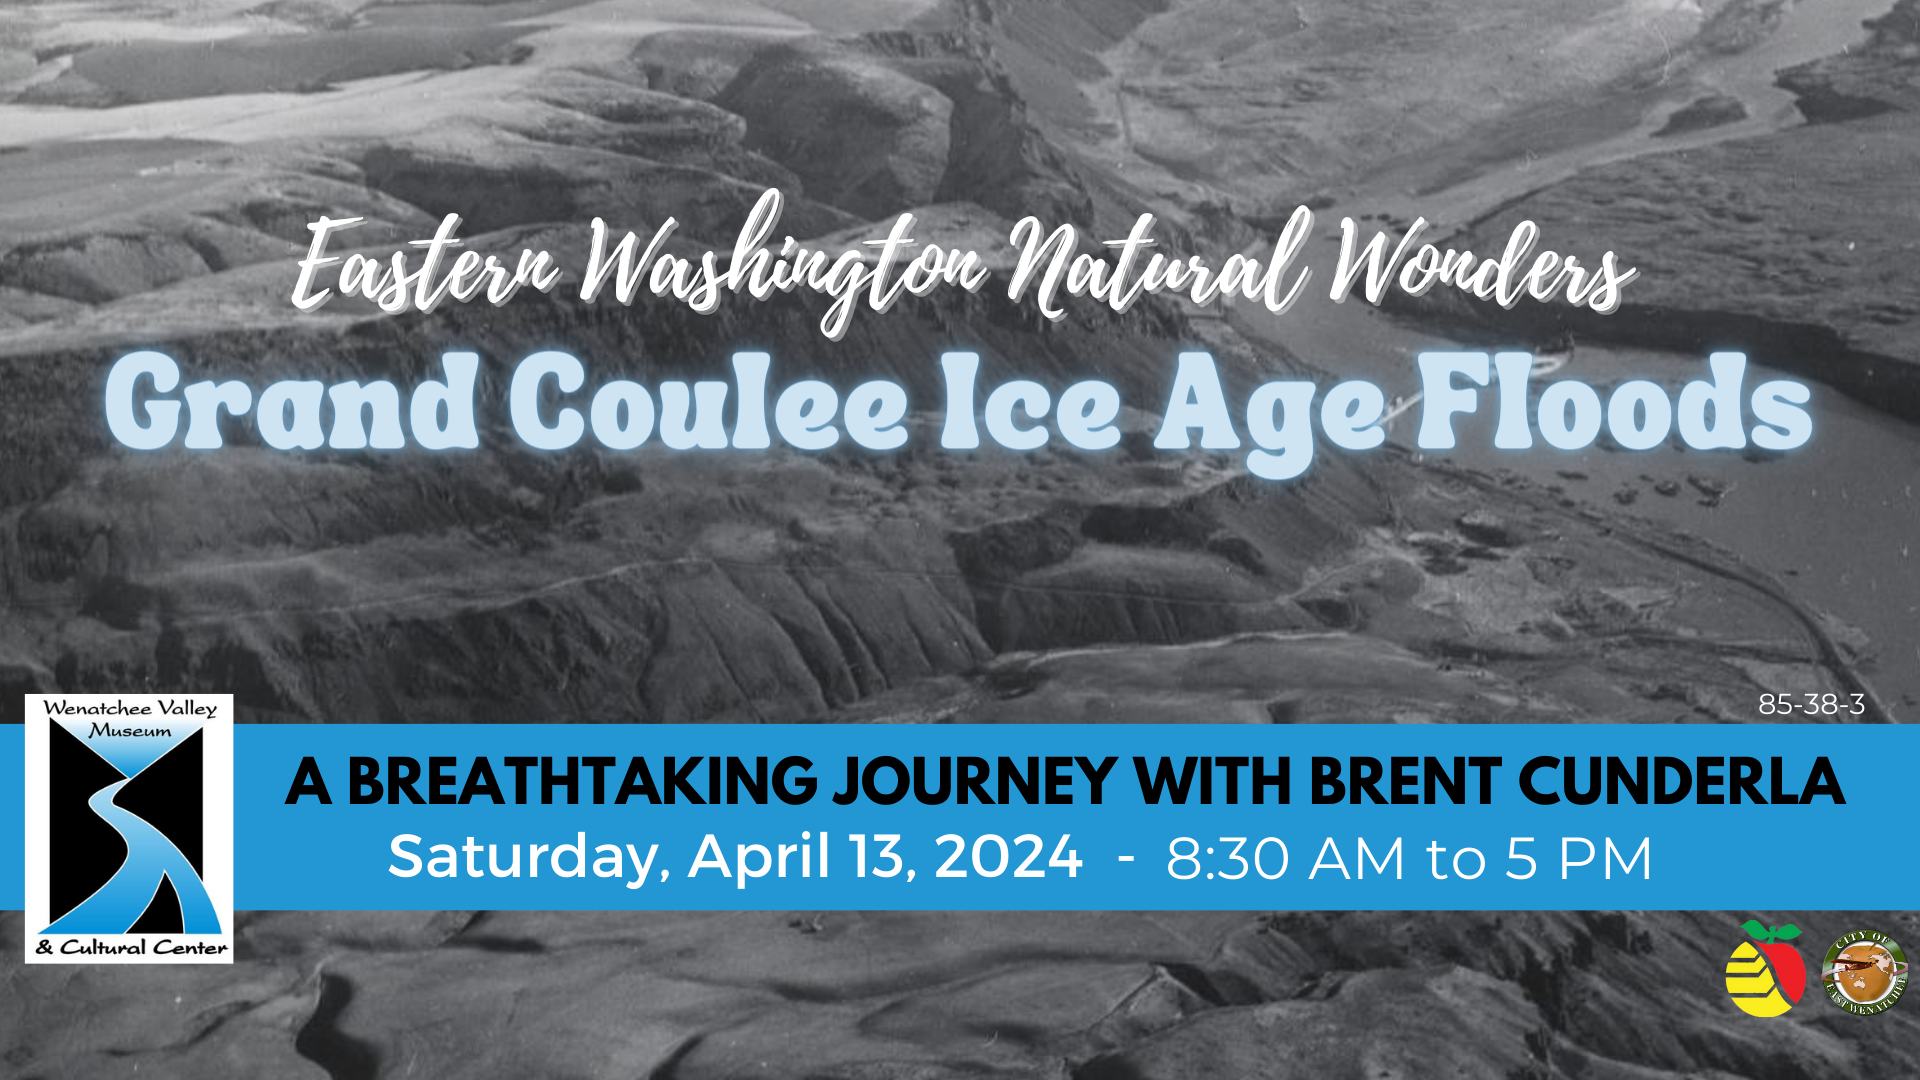 Grand Coulee Ice Age